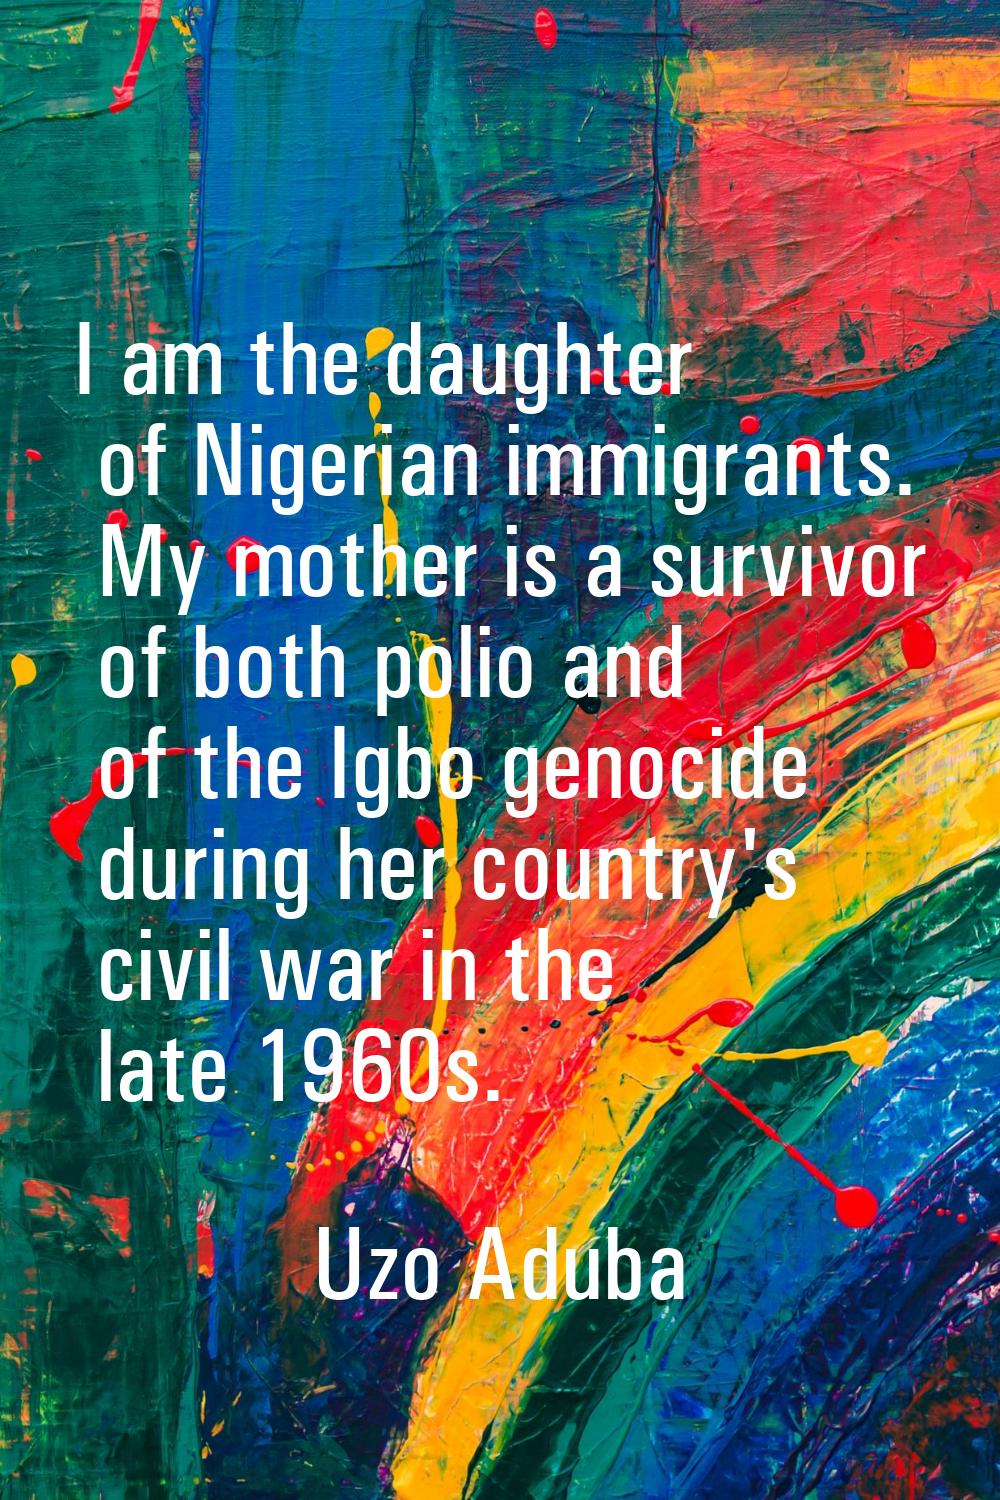 I am the daughter of Nigerian immigrants. My mother is a survivor of both polio and of the Igbo gen